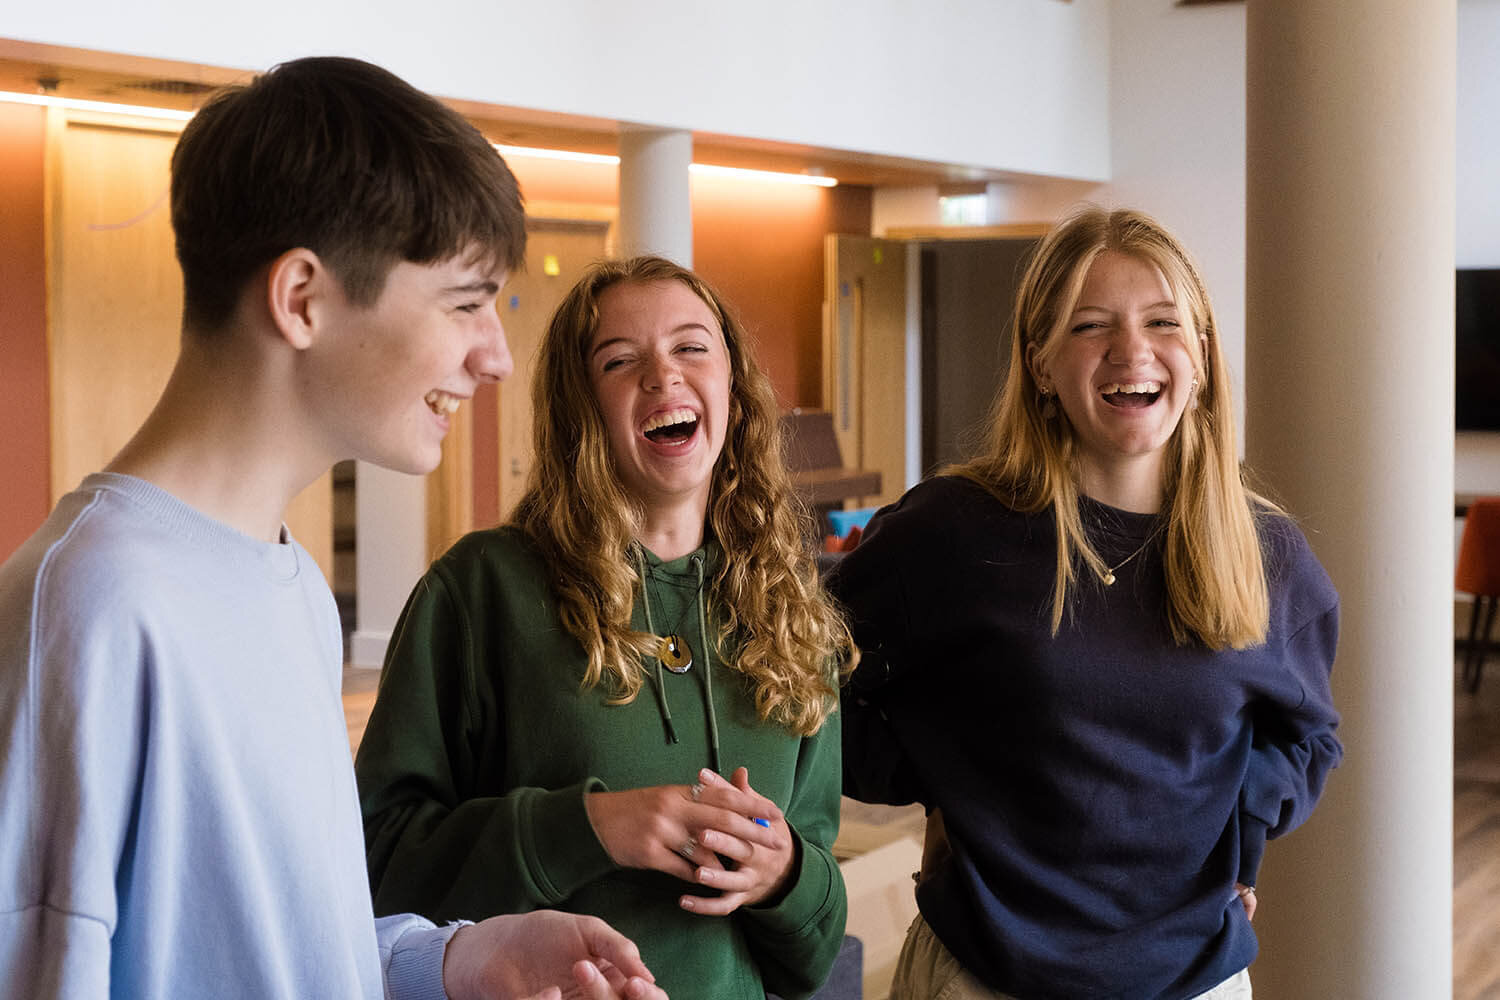 Girls-residential-course-laughing